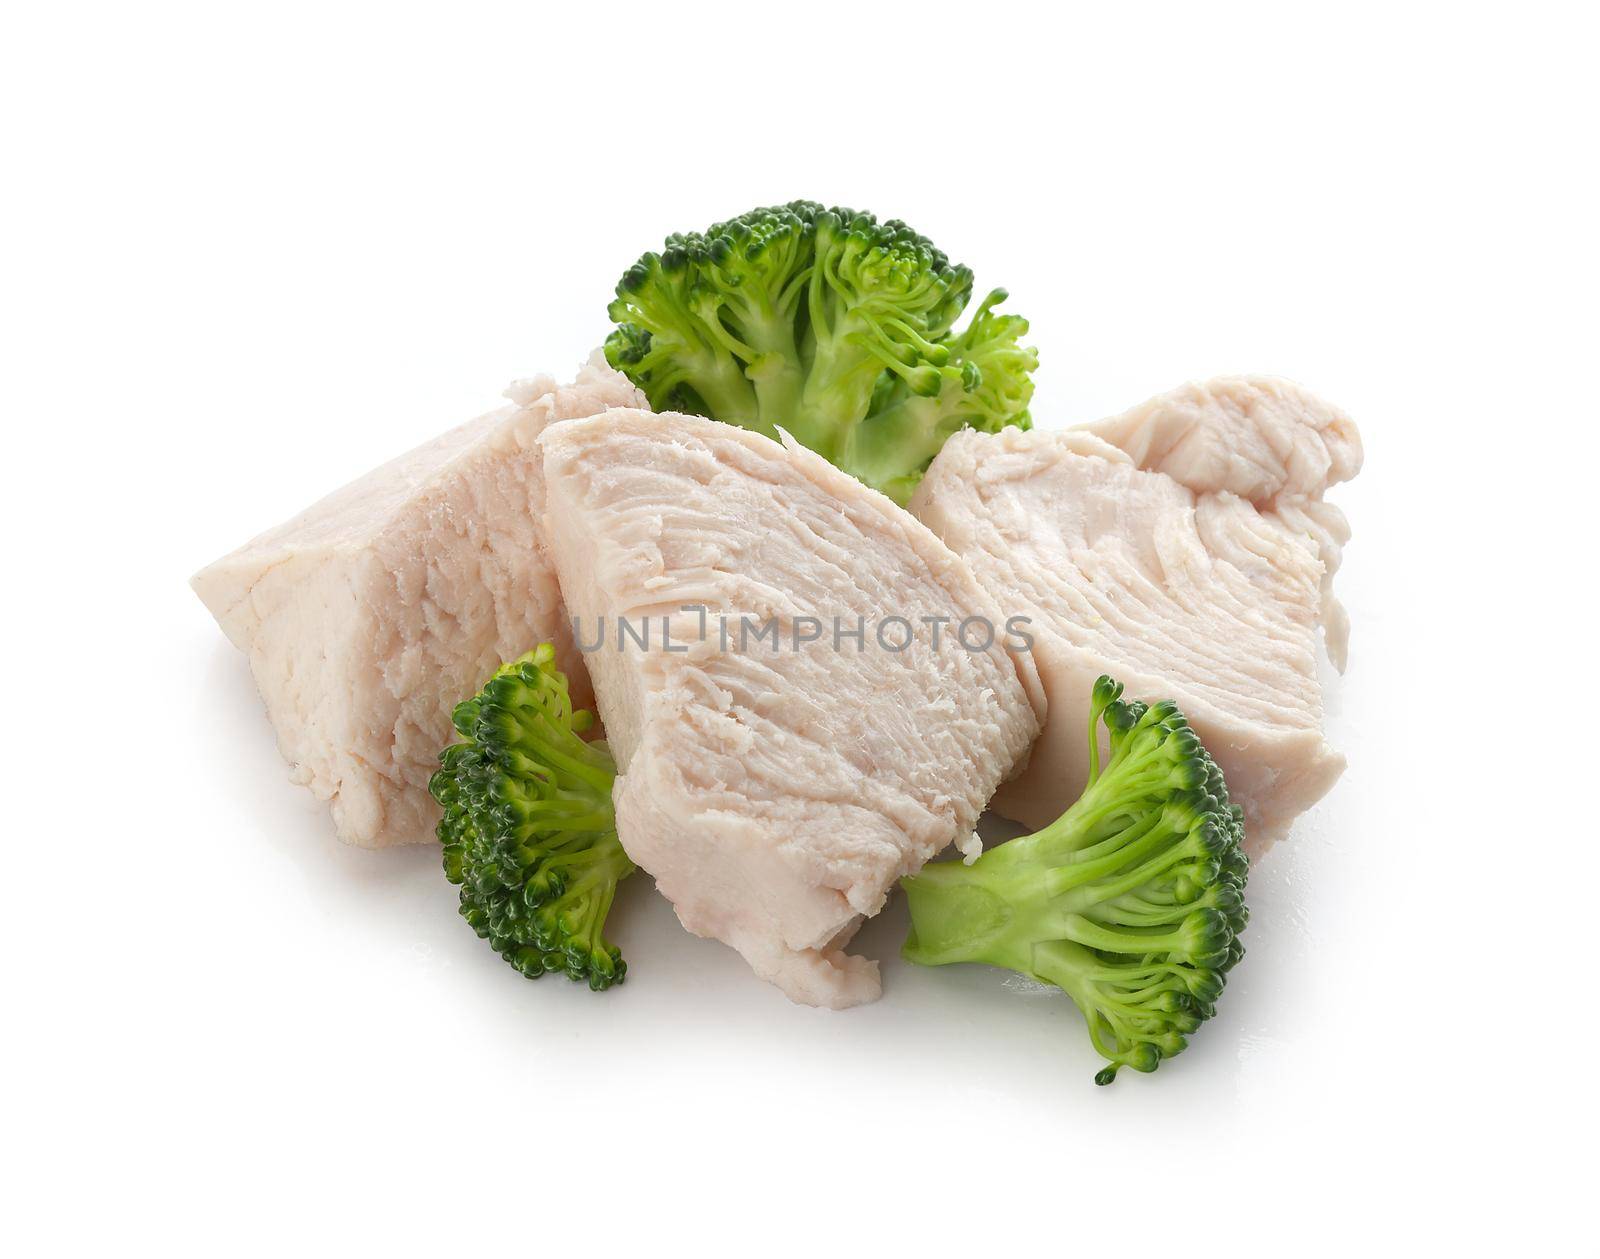 Prepared chicken pieces with broccoli by Angorius